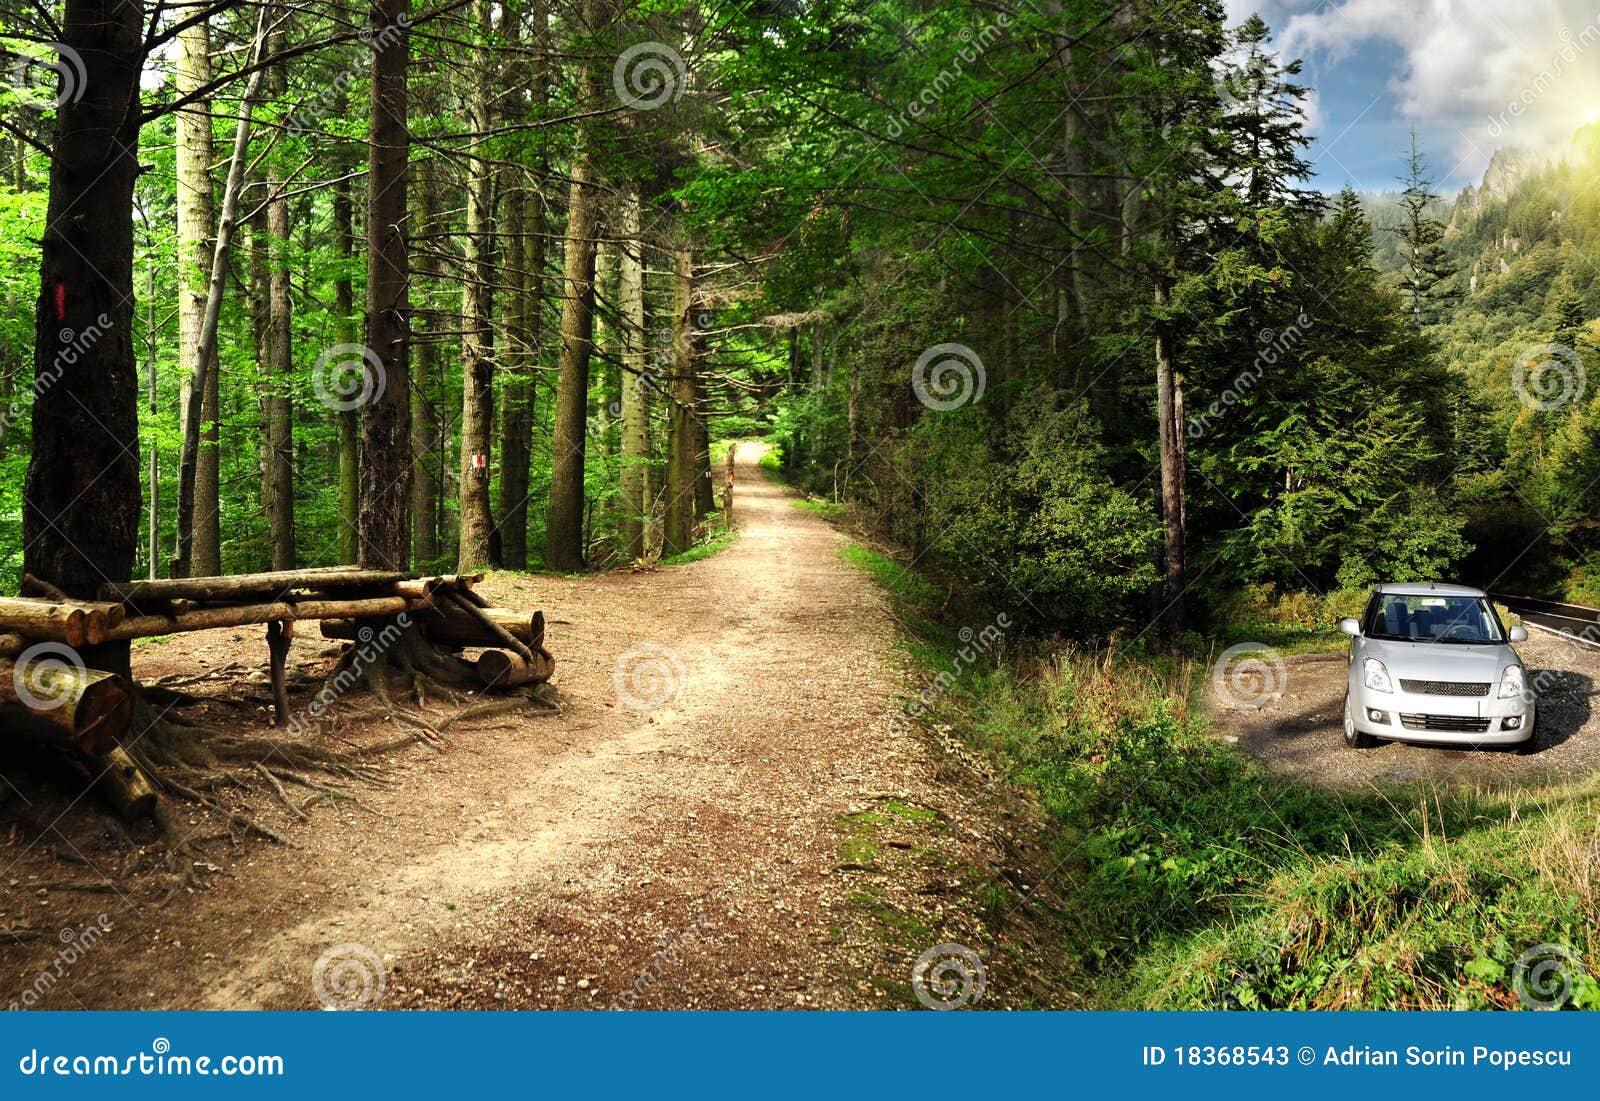 Parked Car In A Scary Forest In The Mountains Stock Photos 